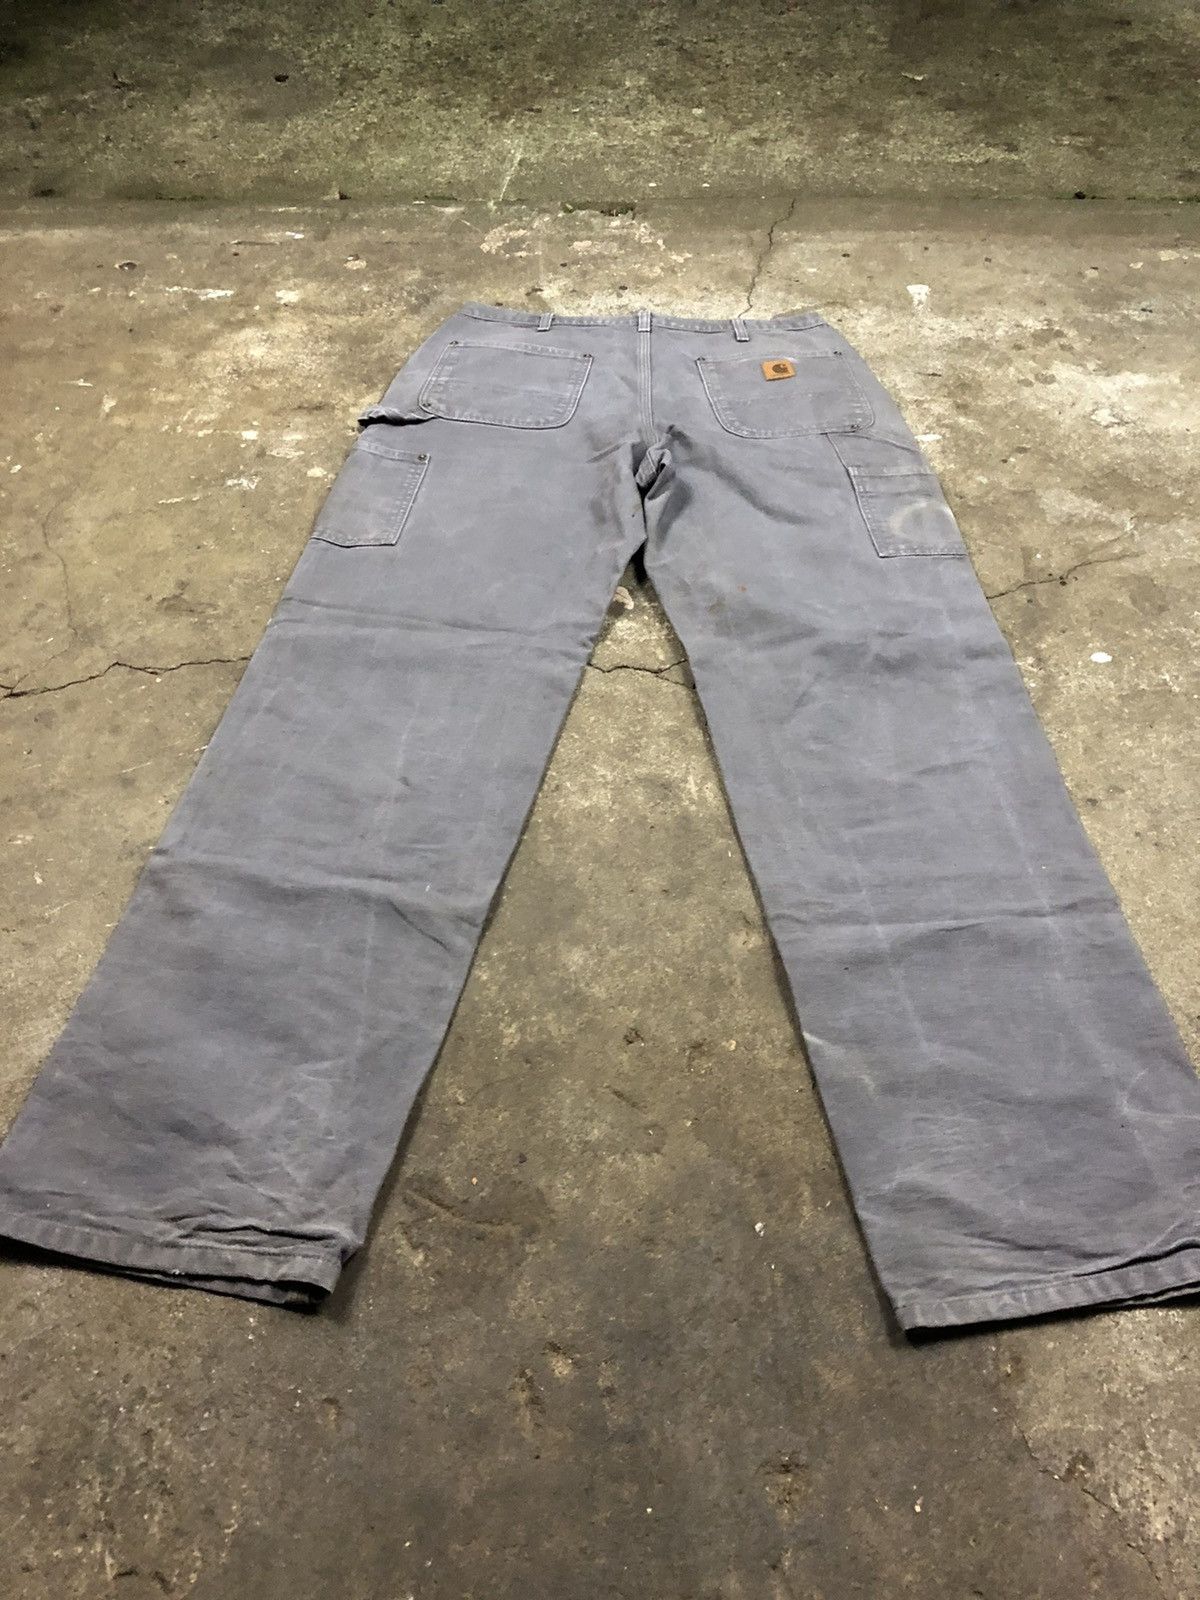 Vintage Carhartt Double Knee Work Pants 34x36 Faded Distressed Size US 34 / EU 50 - 7 Preview